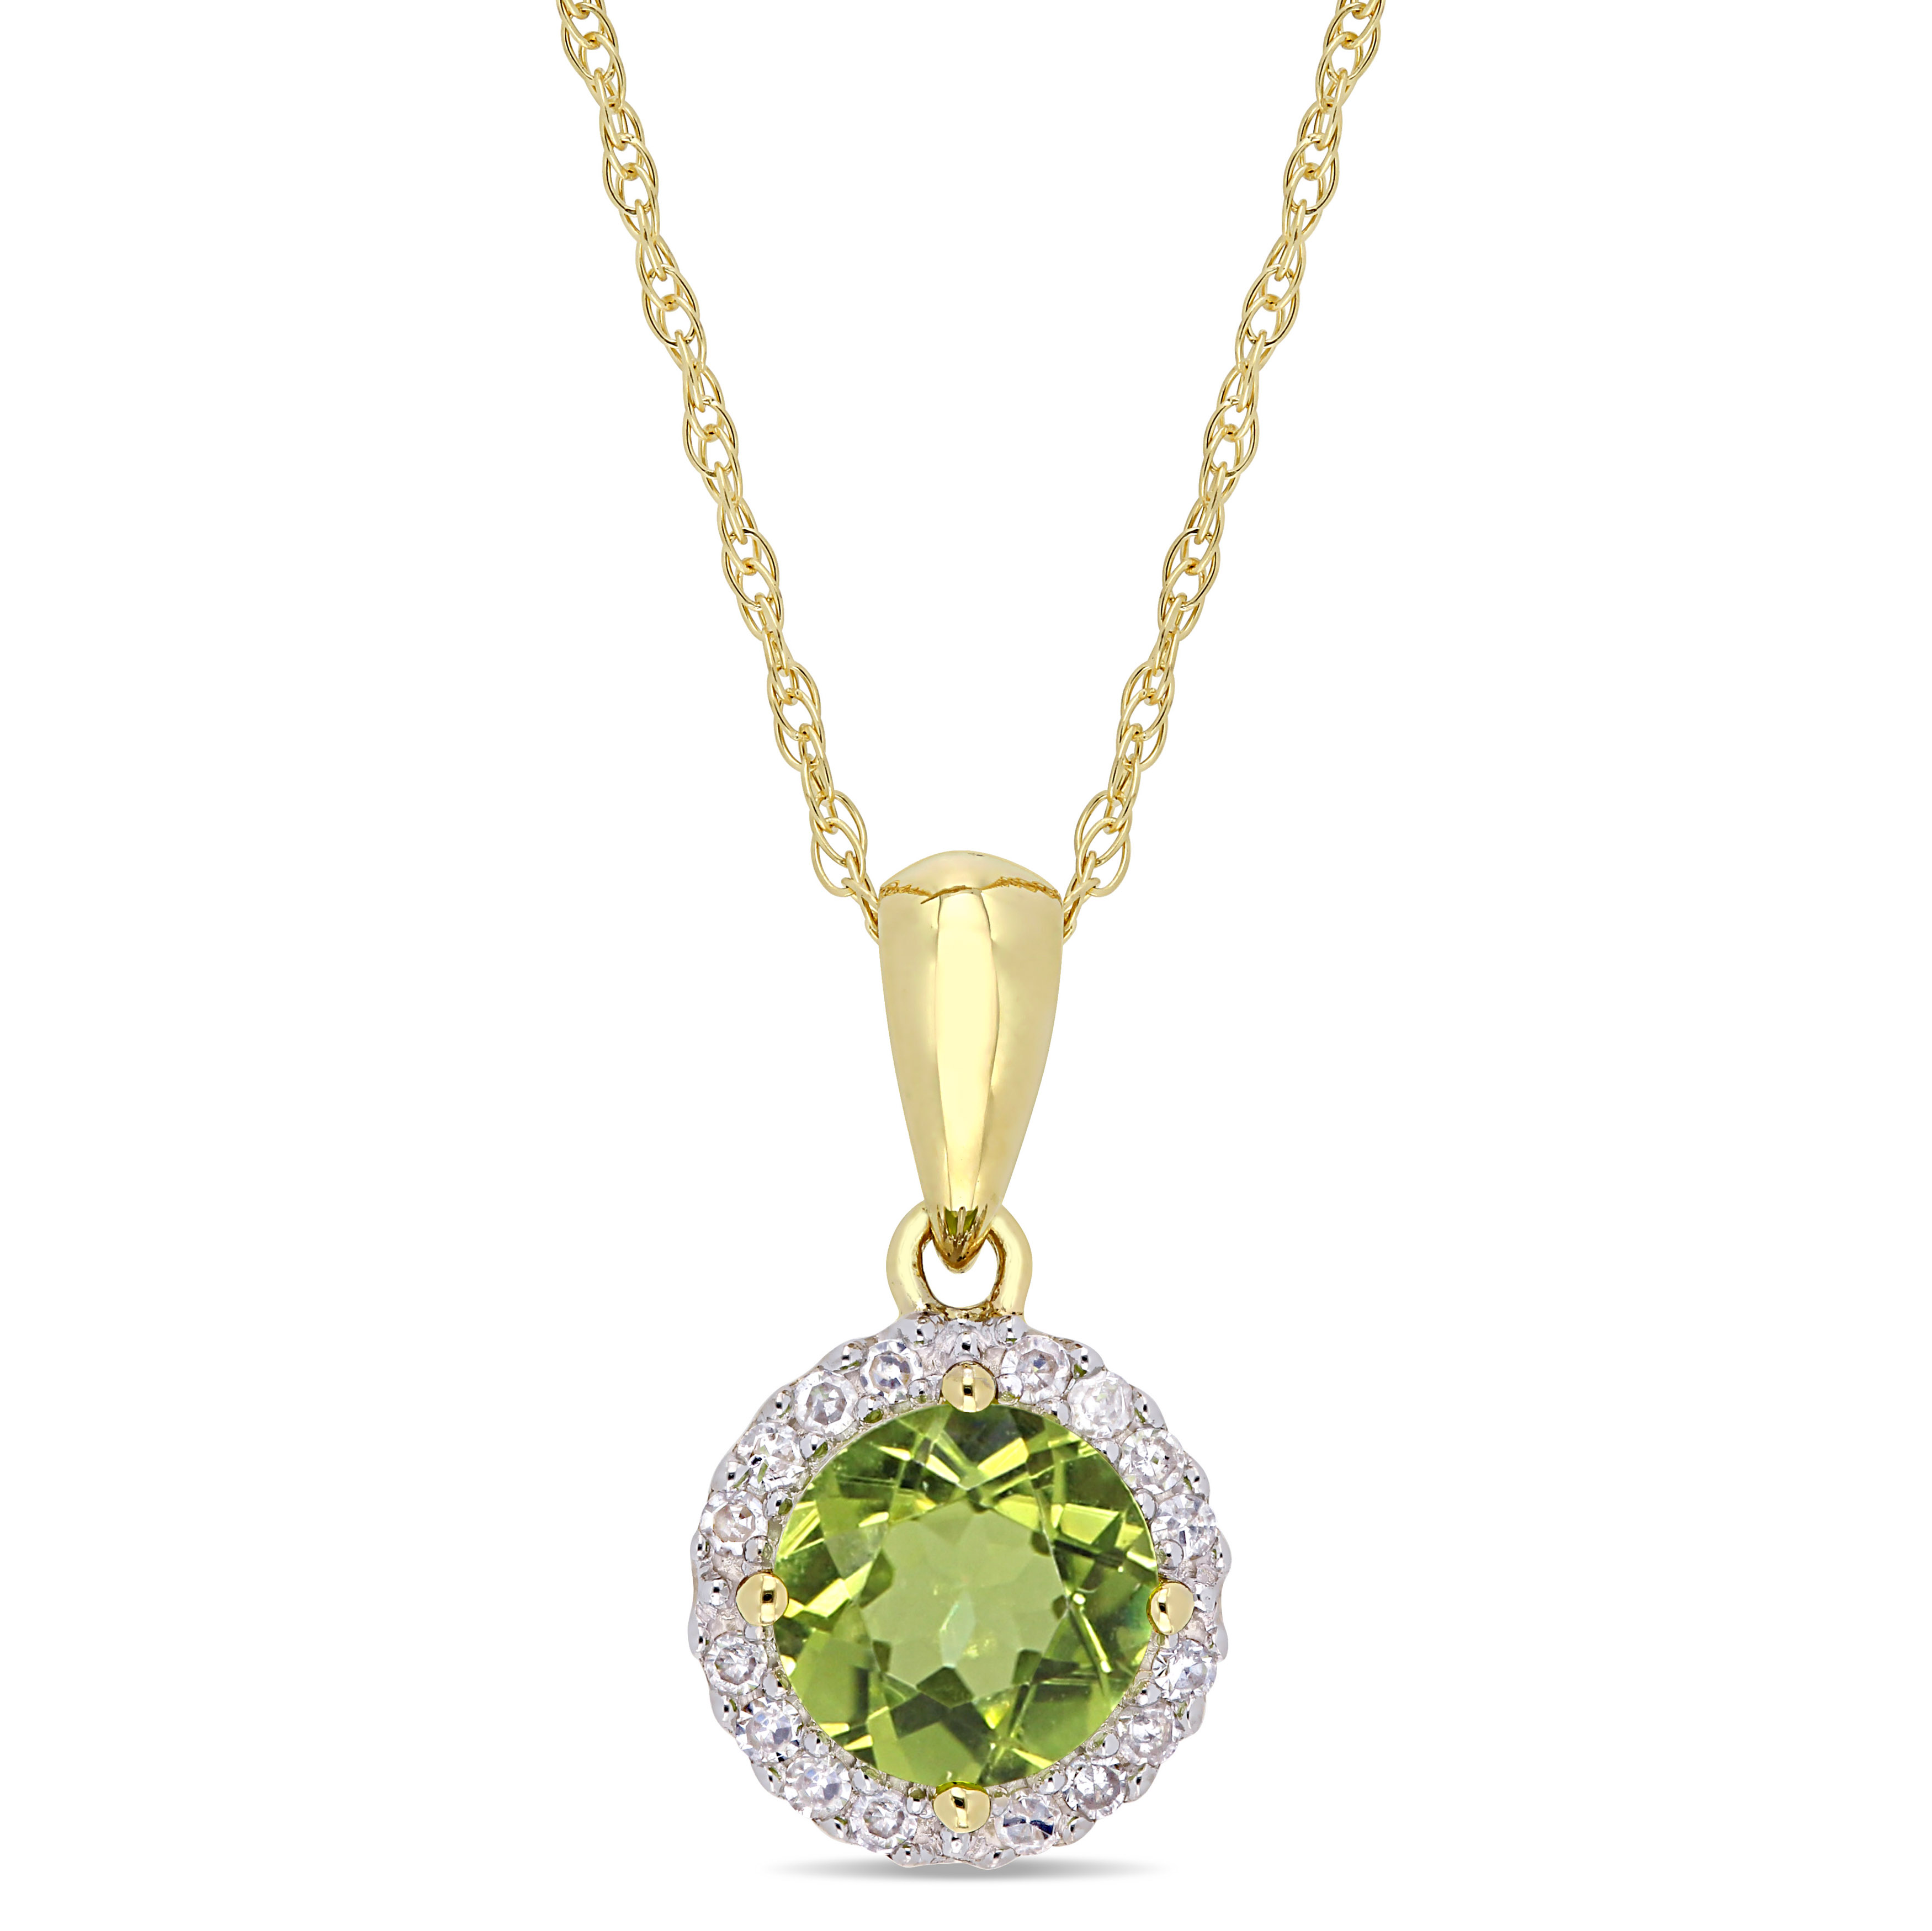 Peridot and 1/10 CT TW Diamond Halo Pendant with Chain in 10k Yellow Gold